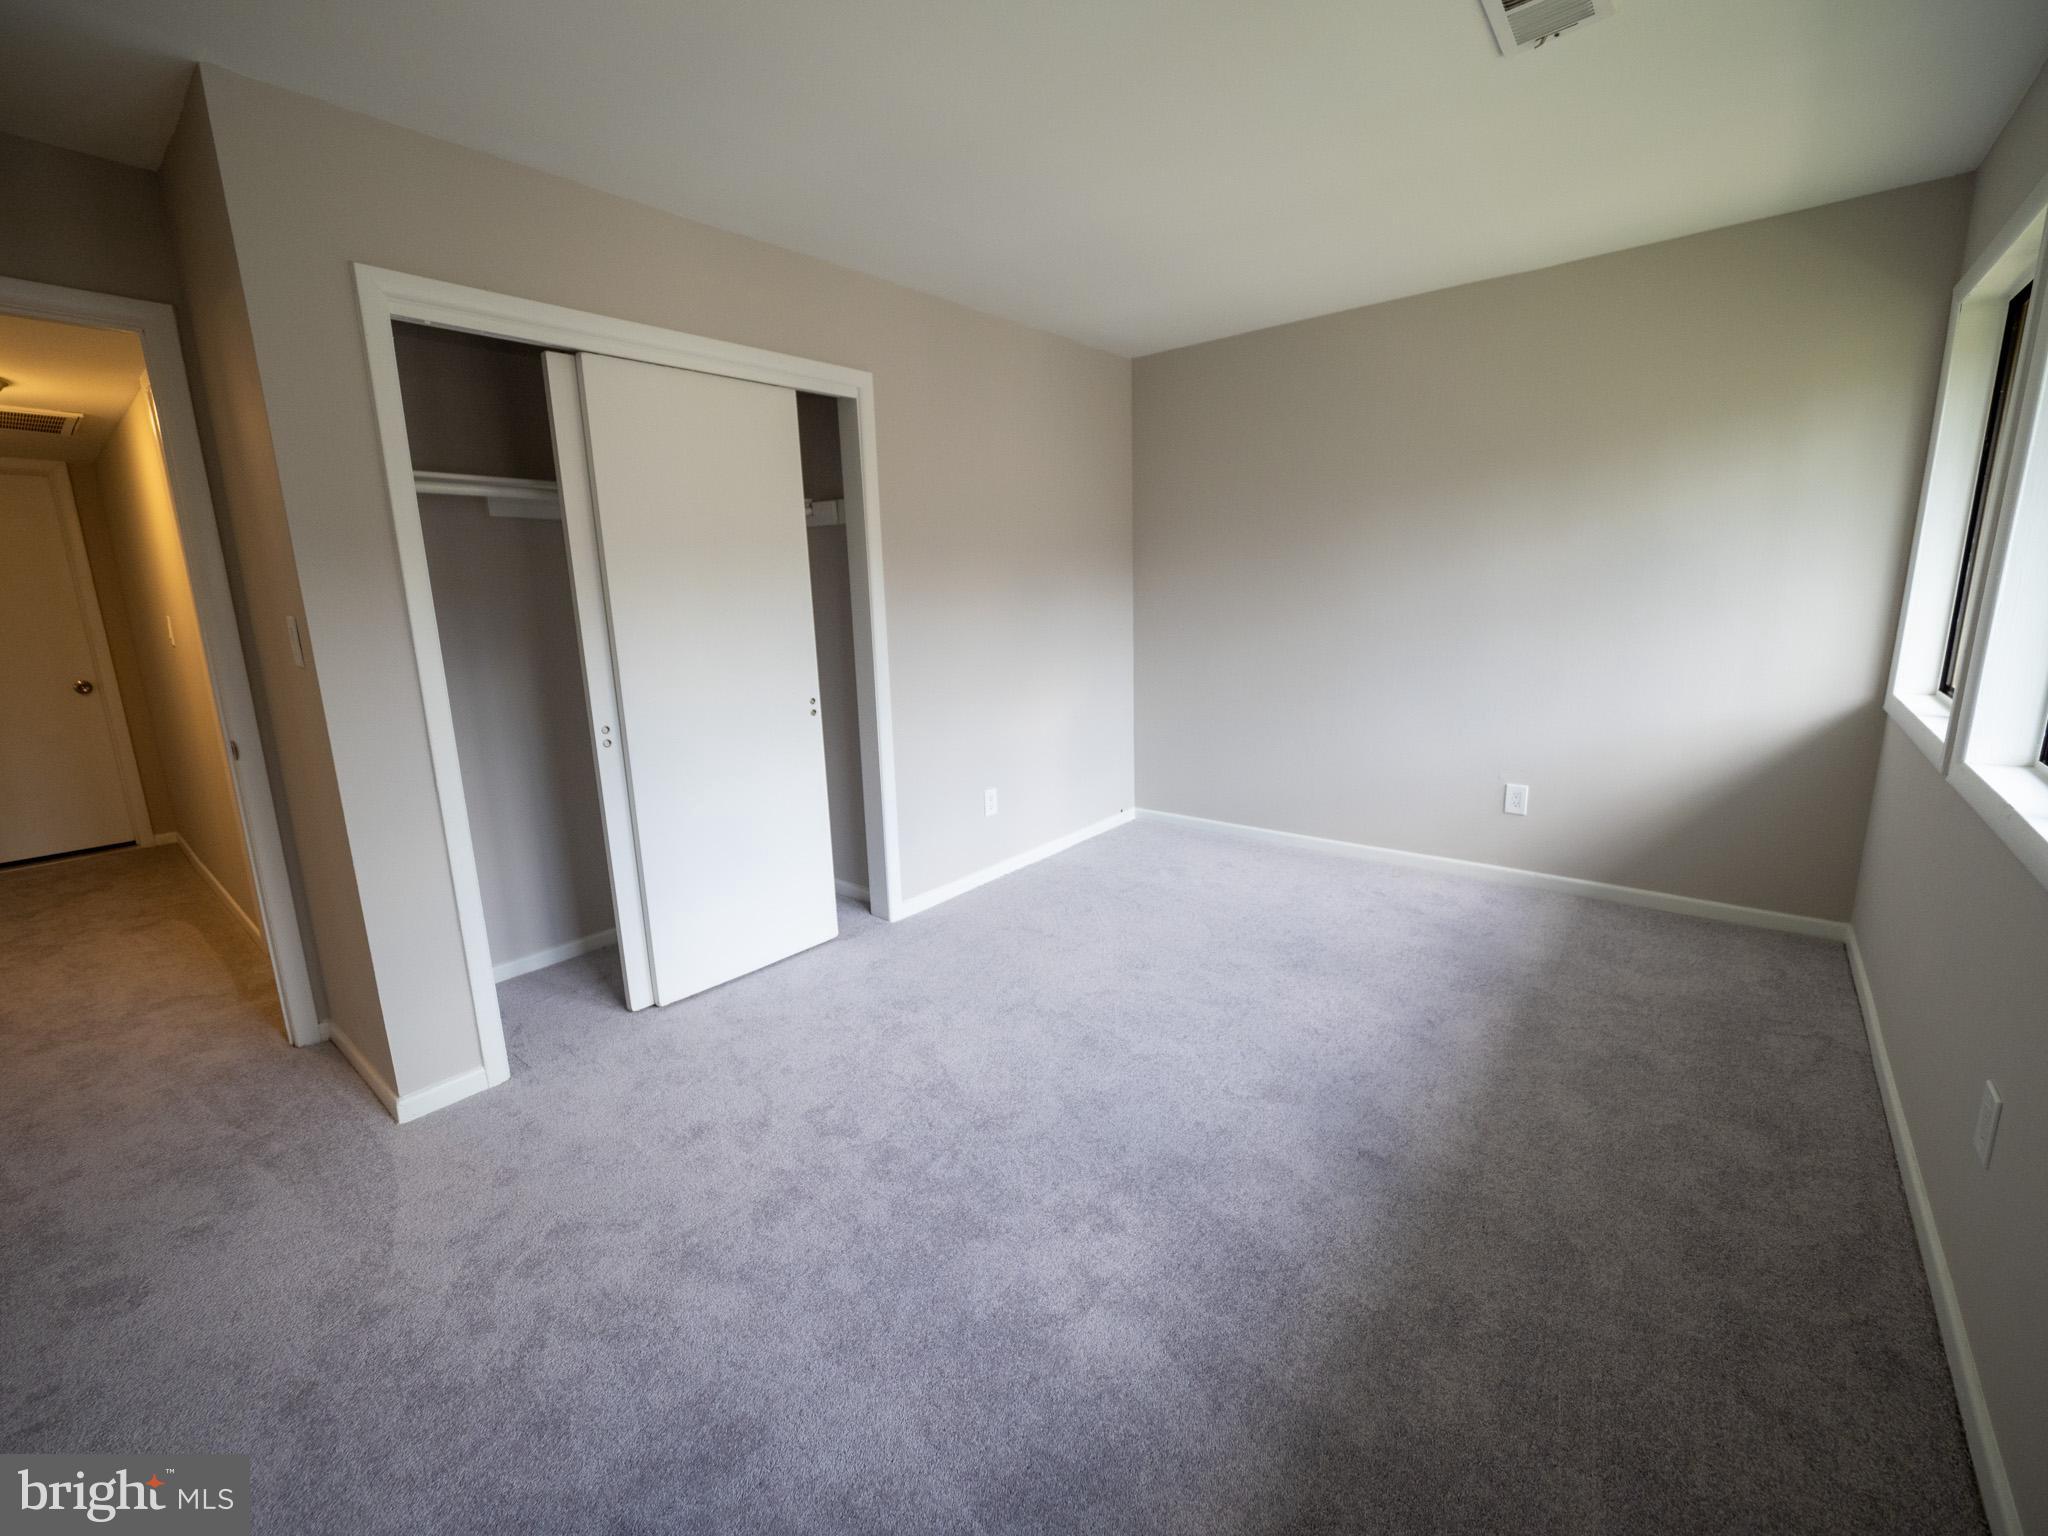 a view of empty room